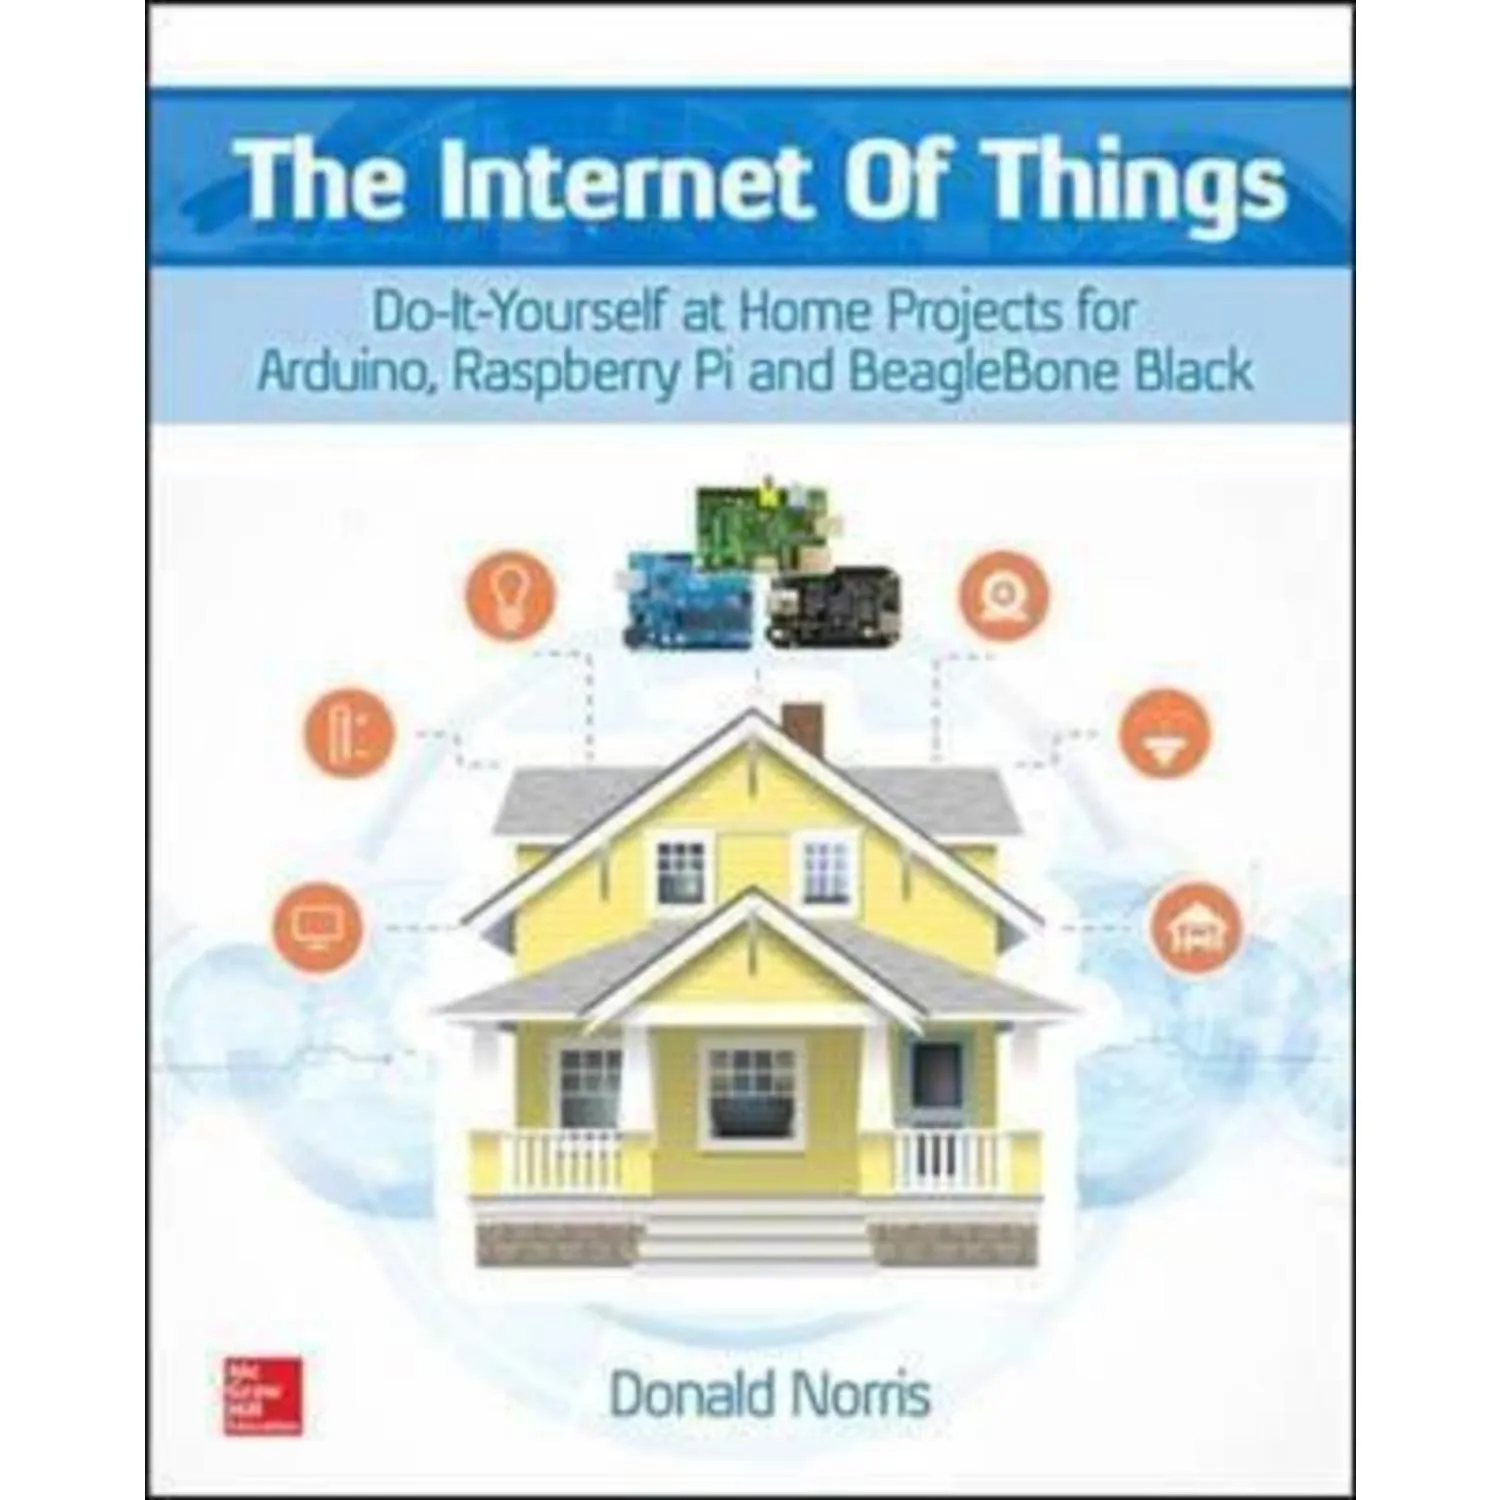 Photo of The Internet of Things: Do-It-Yourself at Home Projects for Arduino, Raspberry Pi and BeagleBone Black